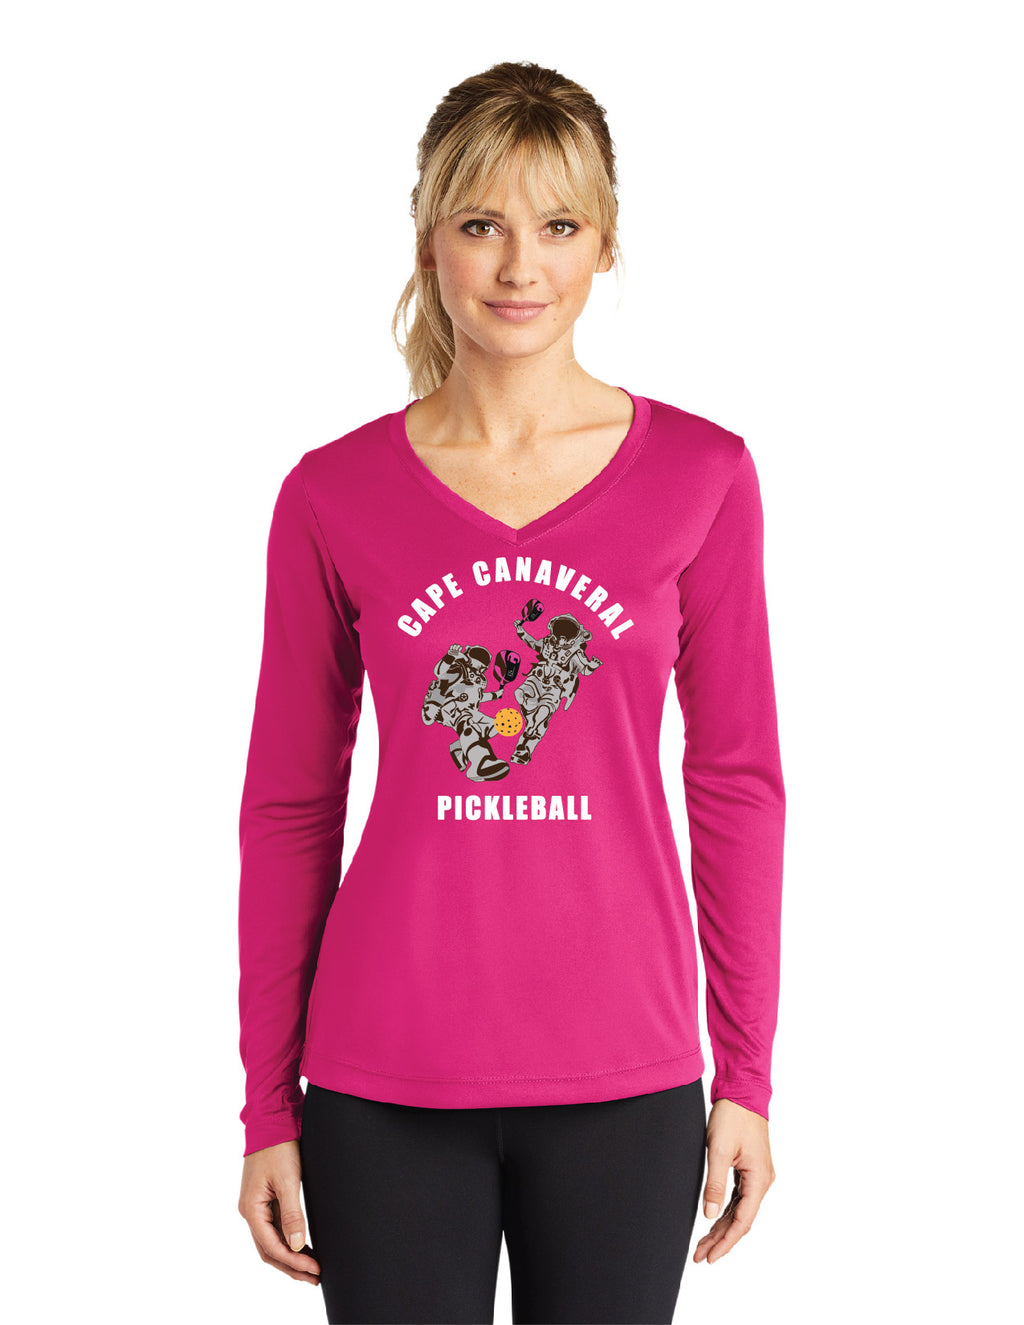 Women's Performance Long Sleeve 'Cape Canaveral' Shirt